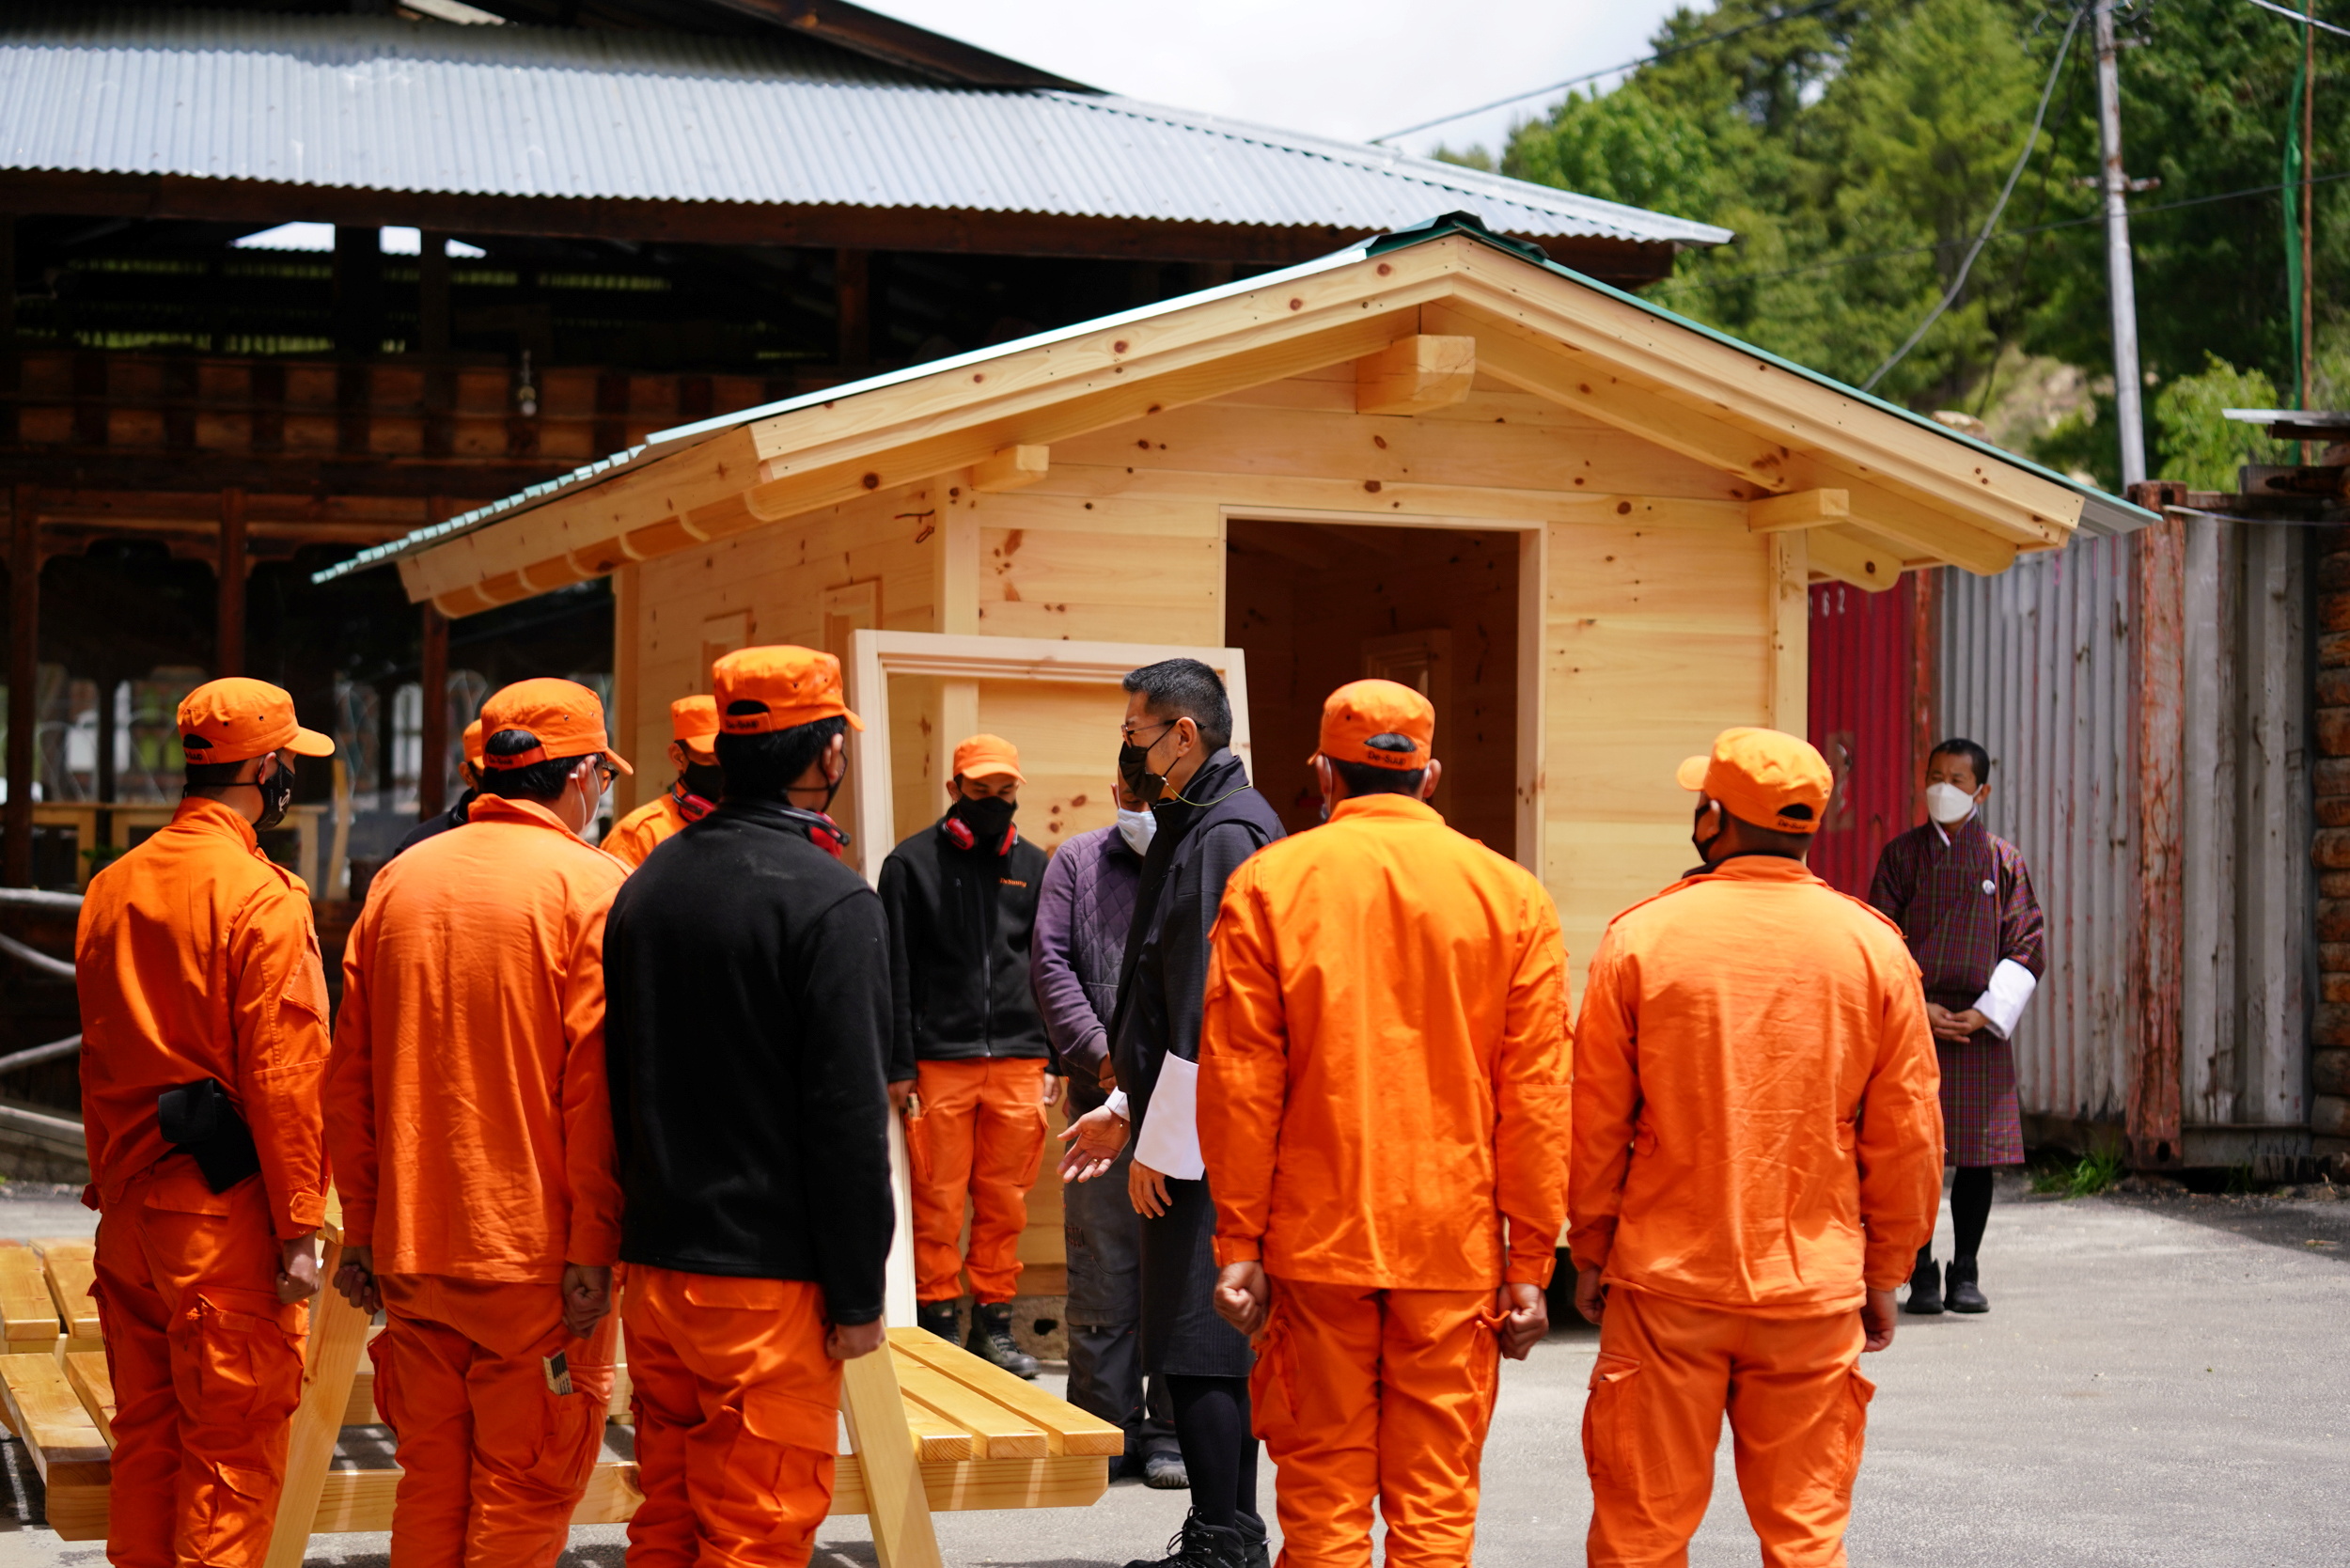 Bhutan's King Jigme Khesar Namgyel Wangchuck visits a group of Desuups training at Carpentry Edelweiss during his visit to remote villages to oversee measures to contain the spread of the coronavirus disease (COVID-19) in Bumthang